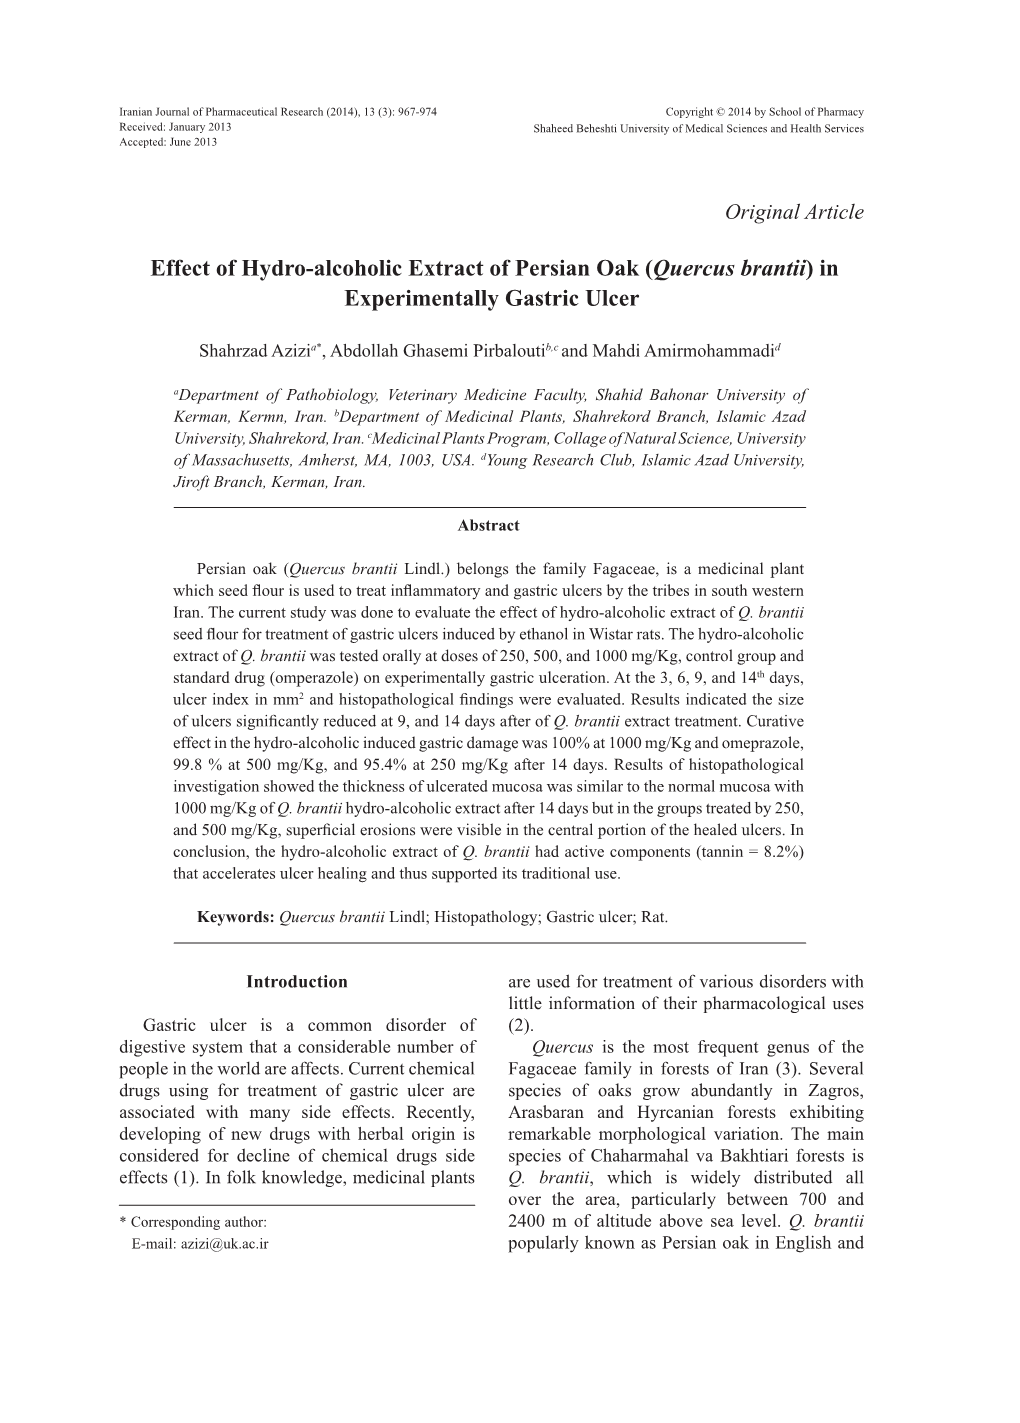 Effect of Hydro-Alcoholic Extract of Persian Oak (Quercus Brantii ) In